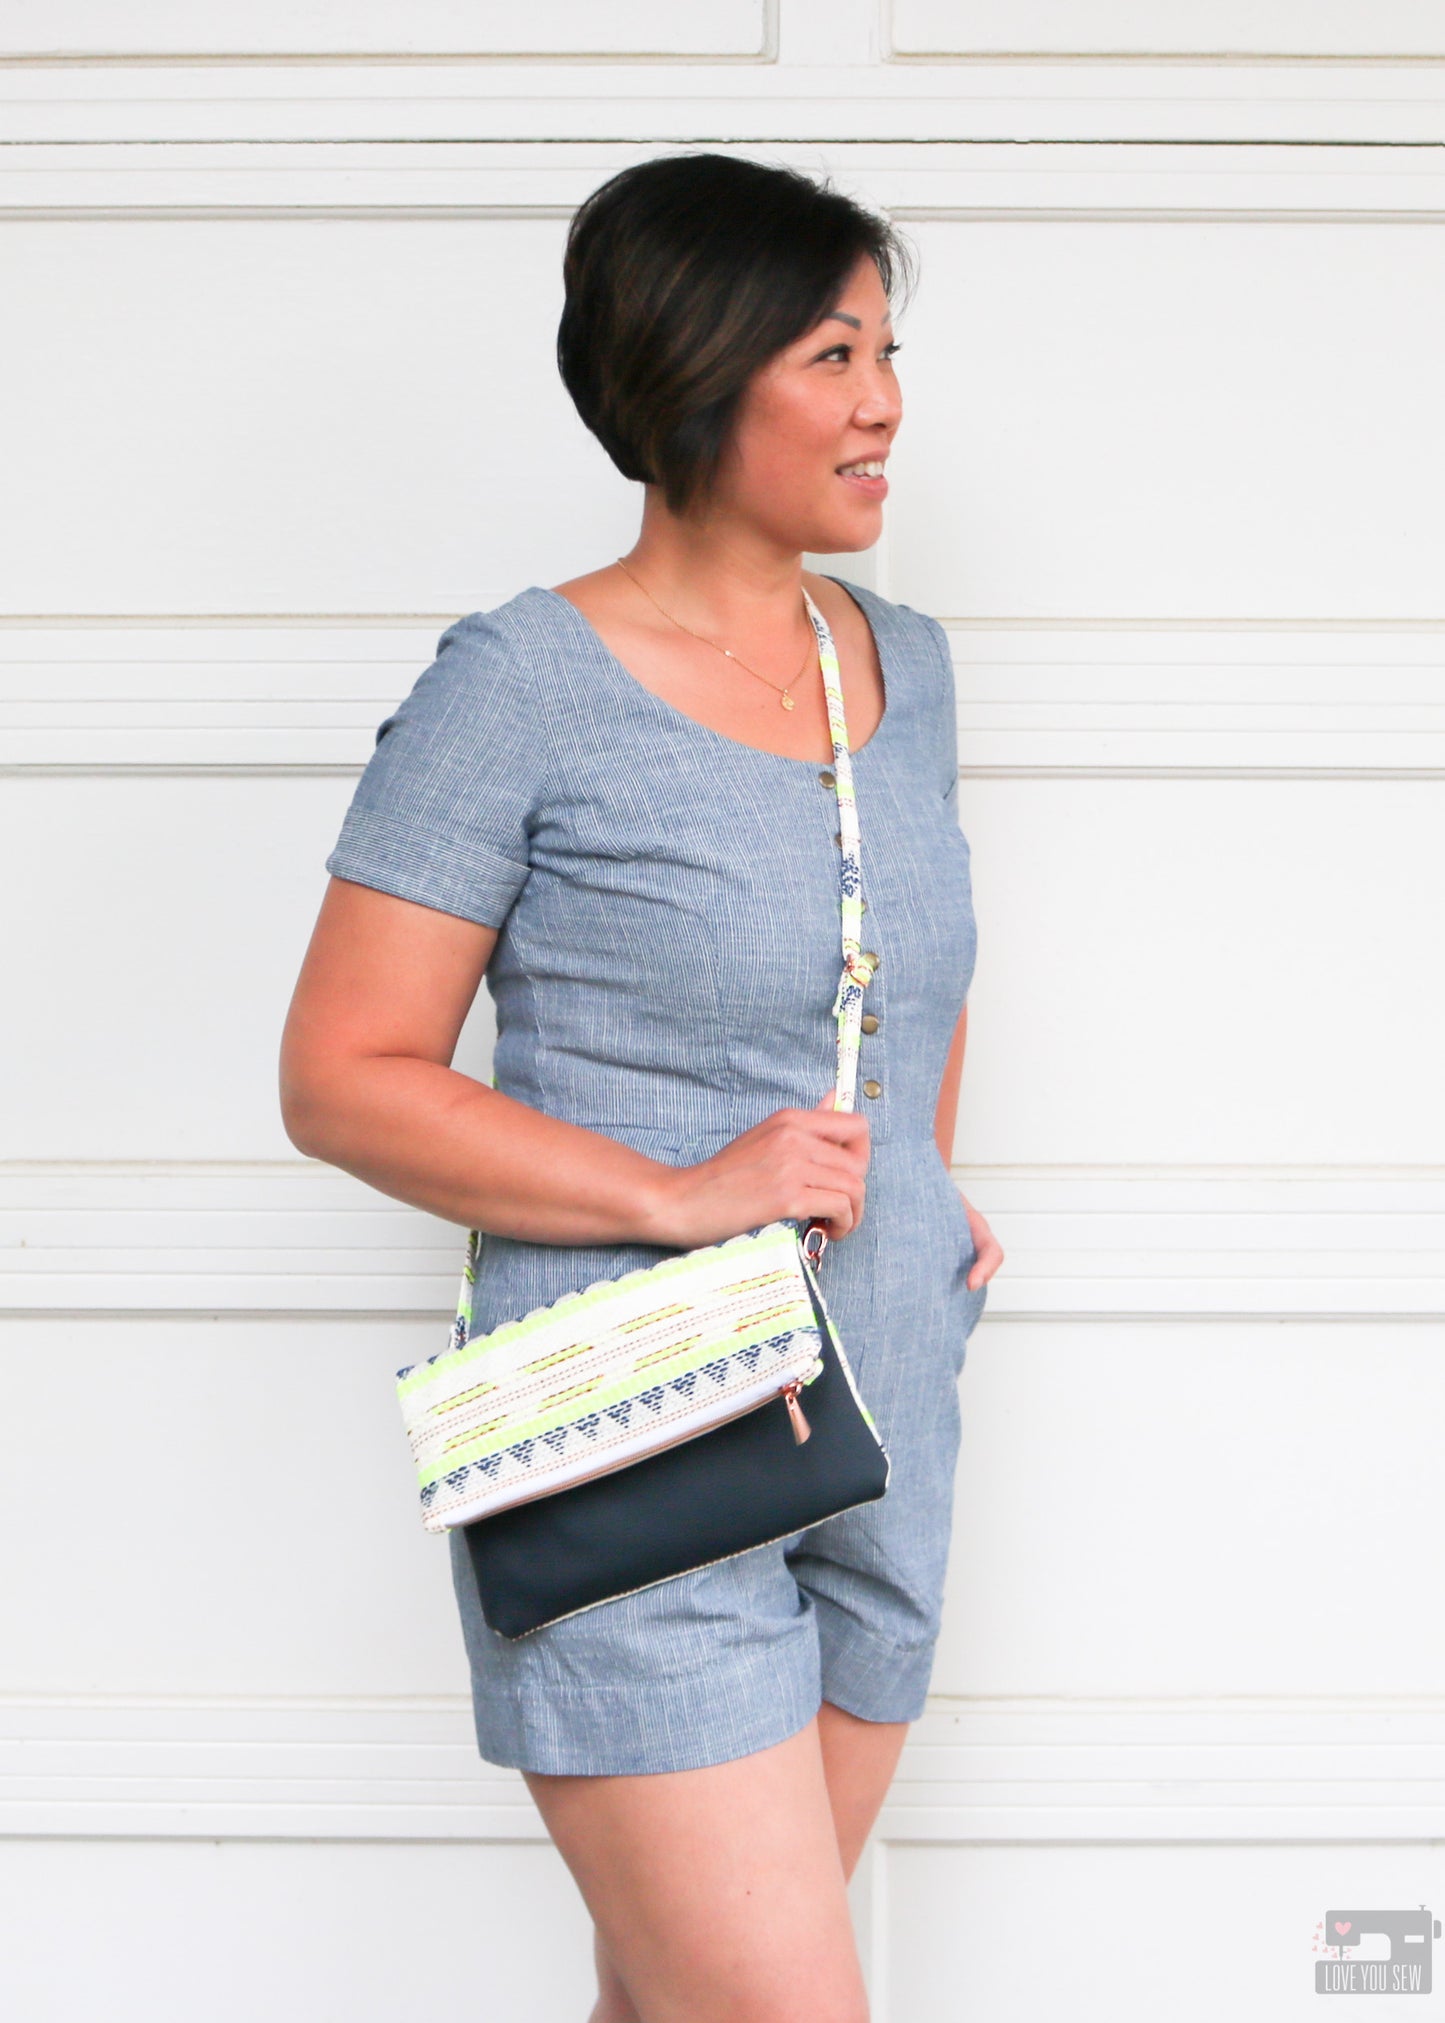 Claire Fold-over Clutch and Crossbody Bag Digital Sewing Pattern